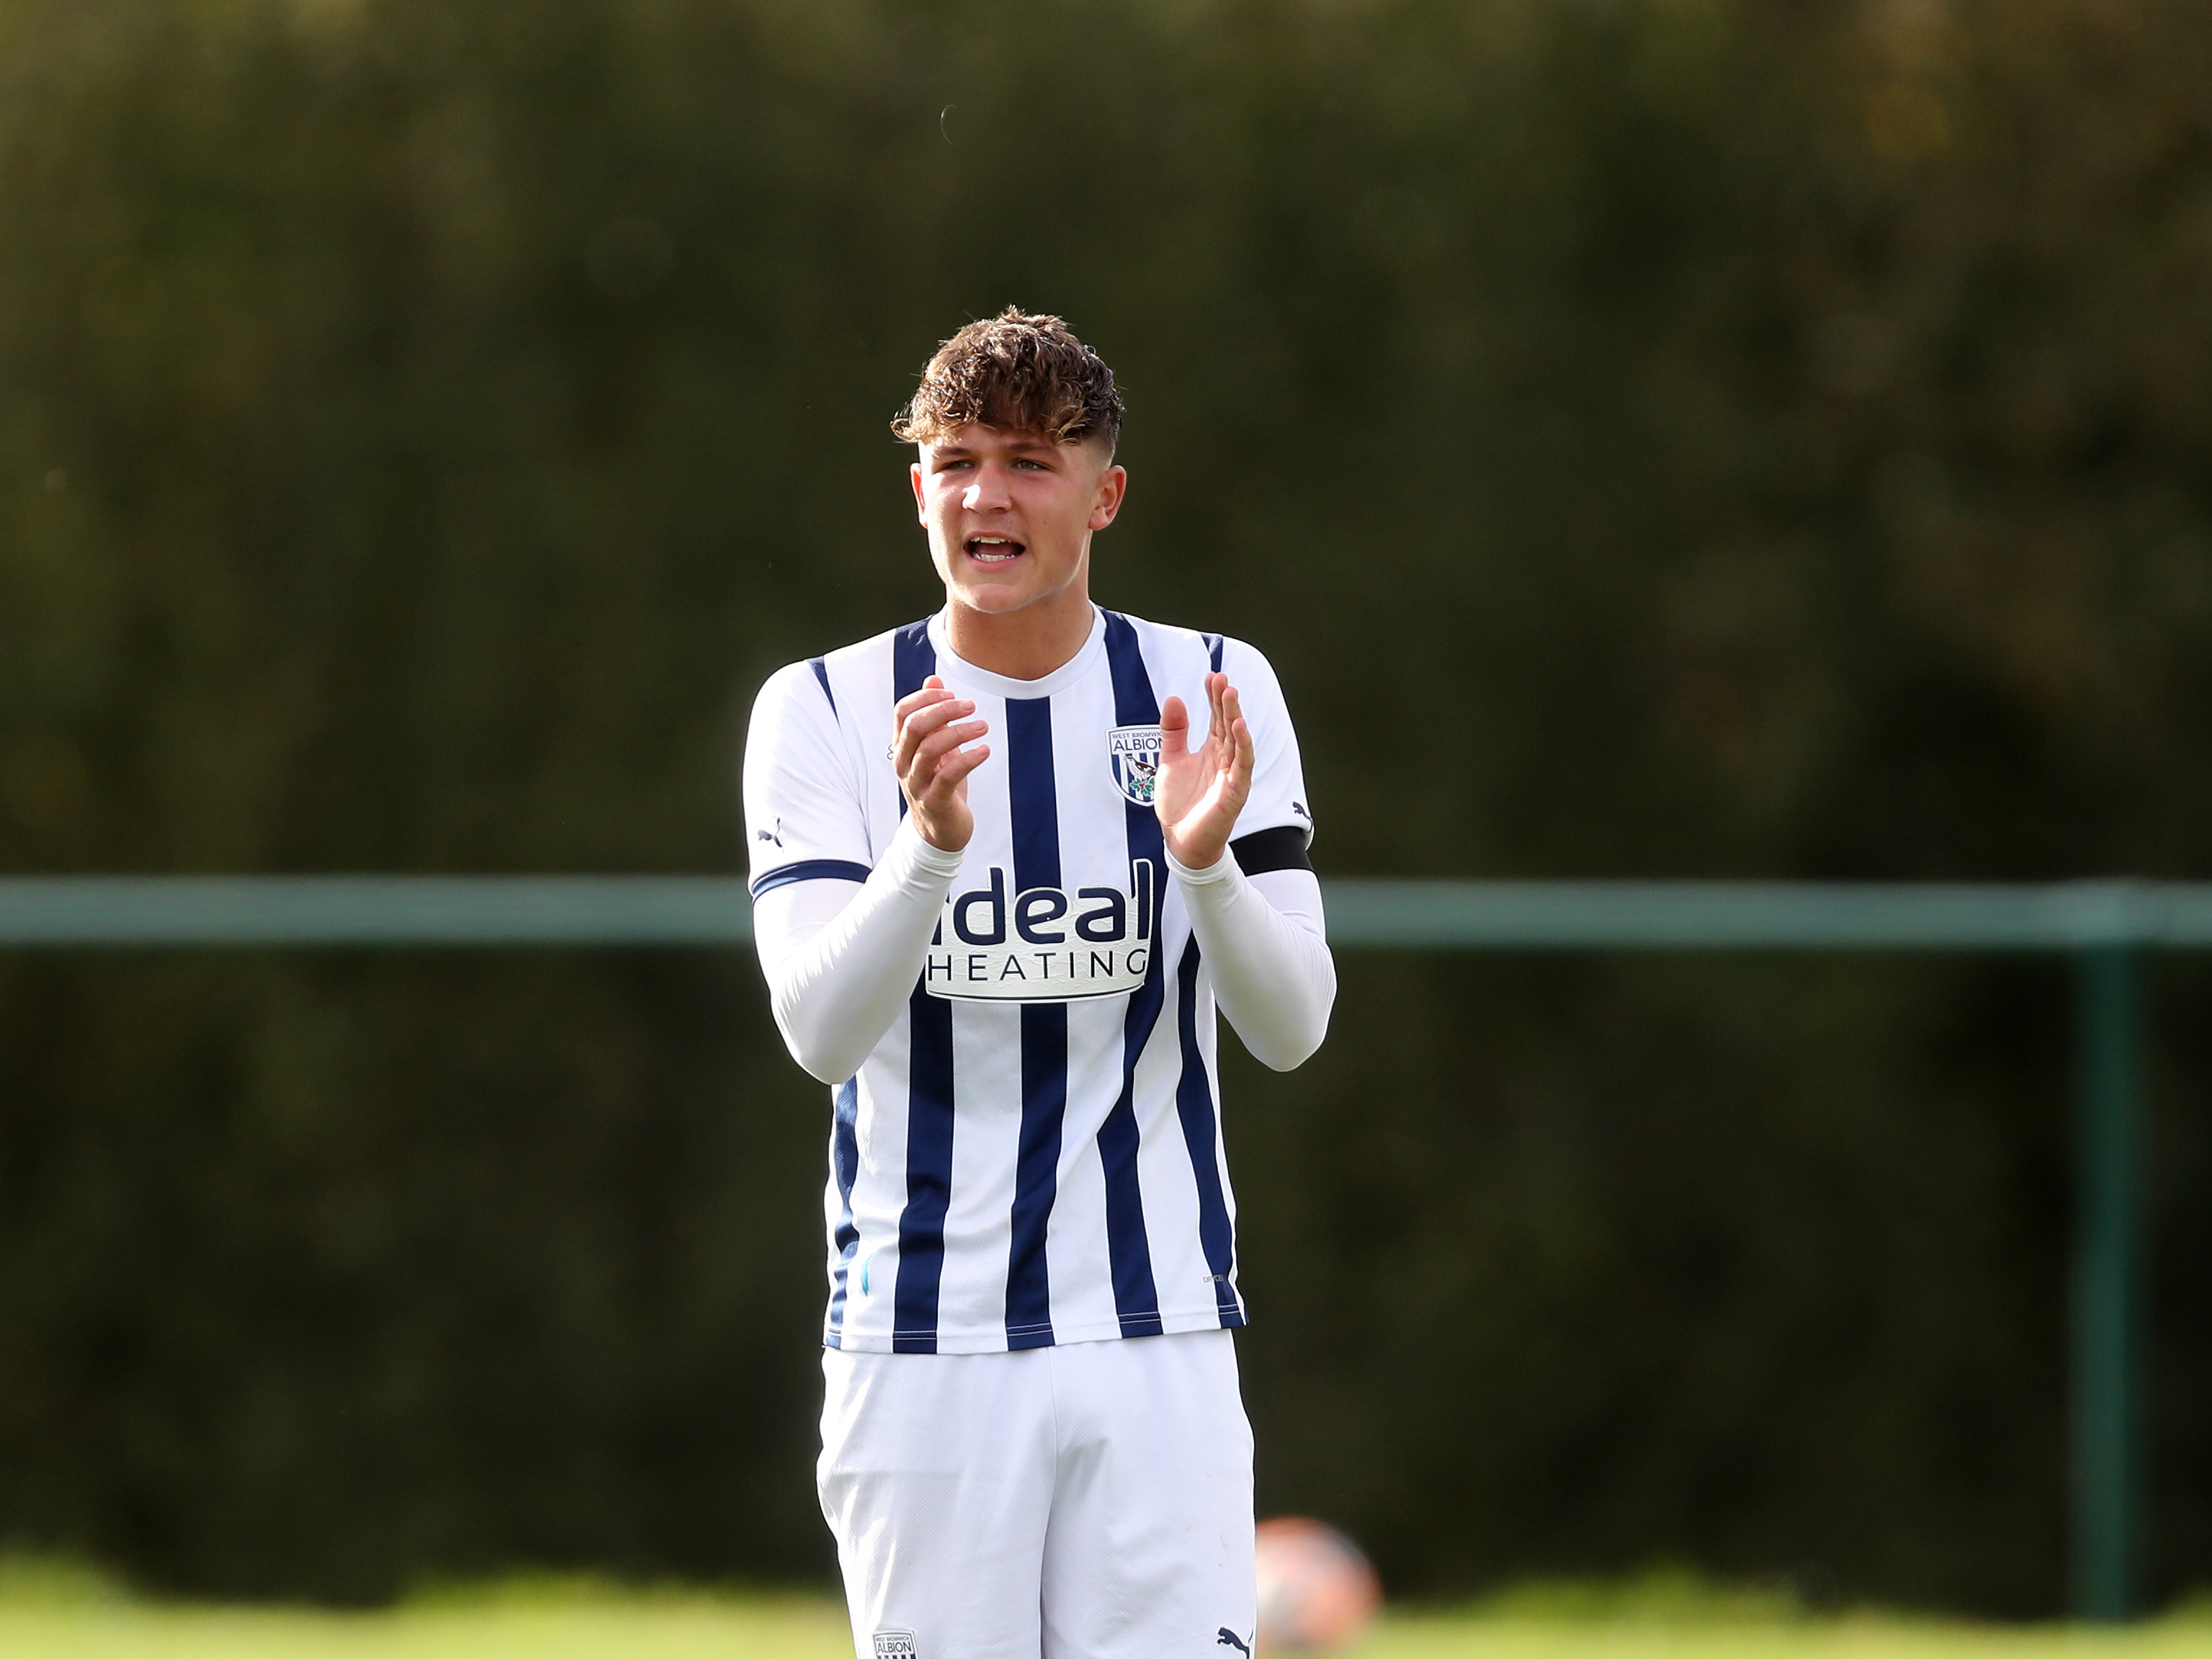 Cole Deeming clapping his hands wearing the home kit in action for Albion's U18 side